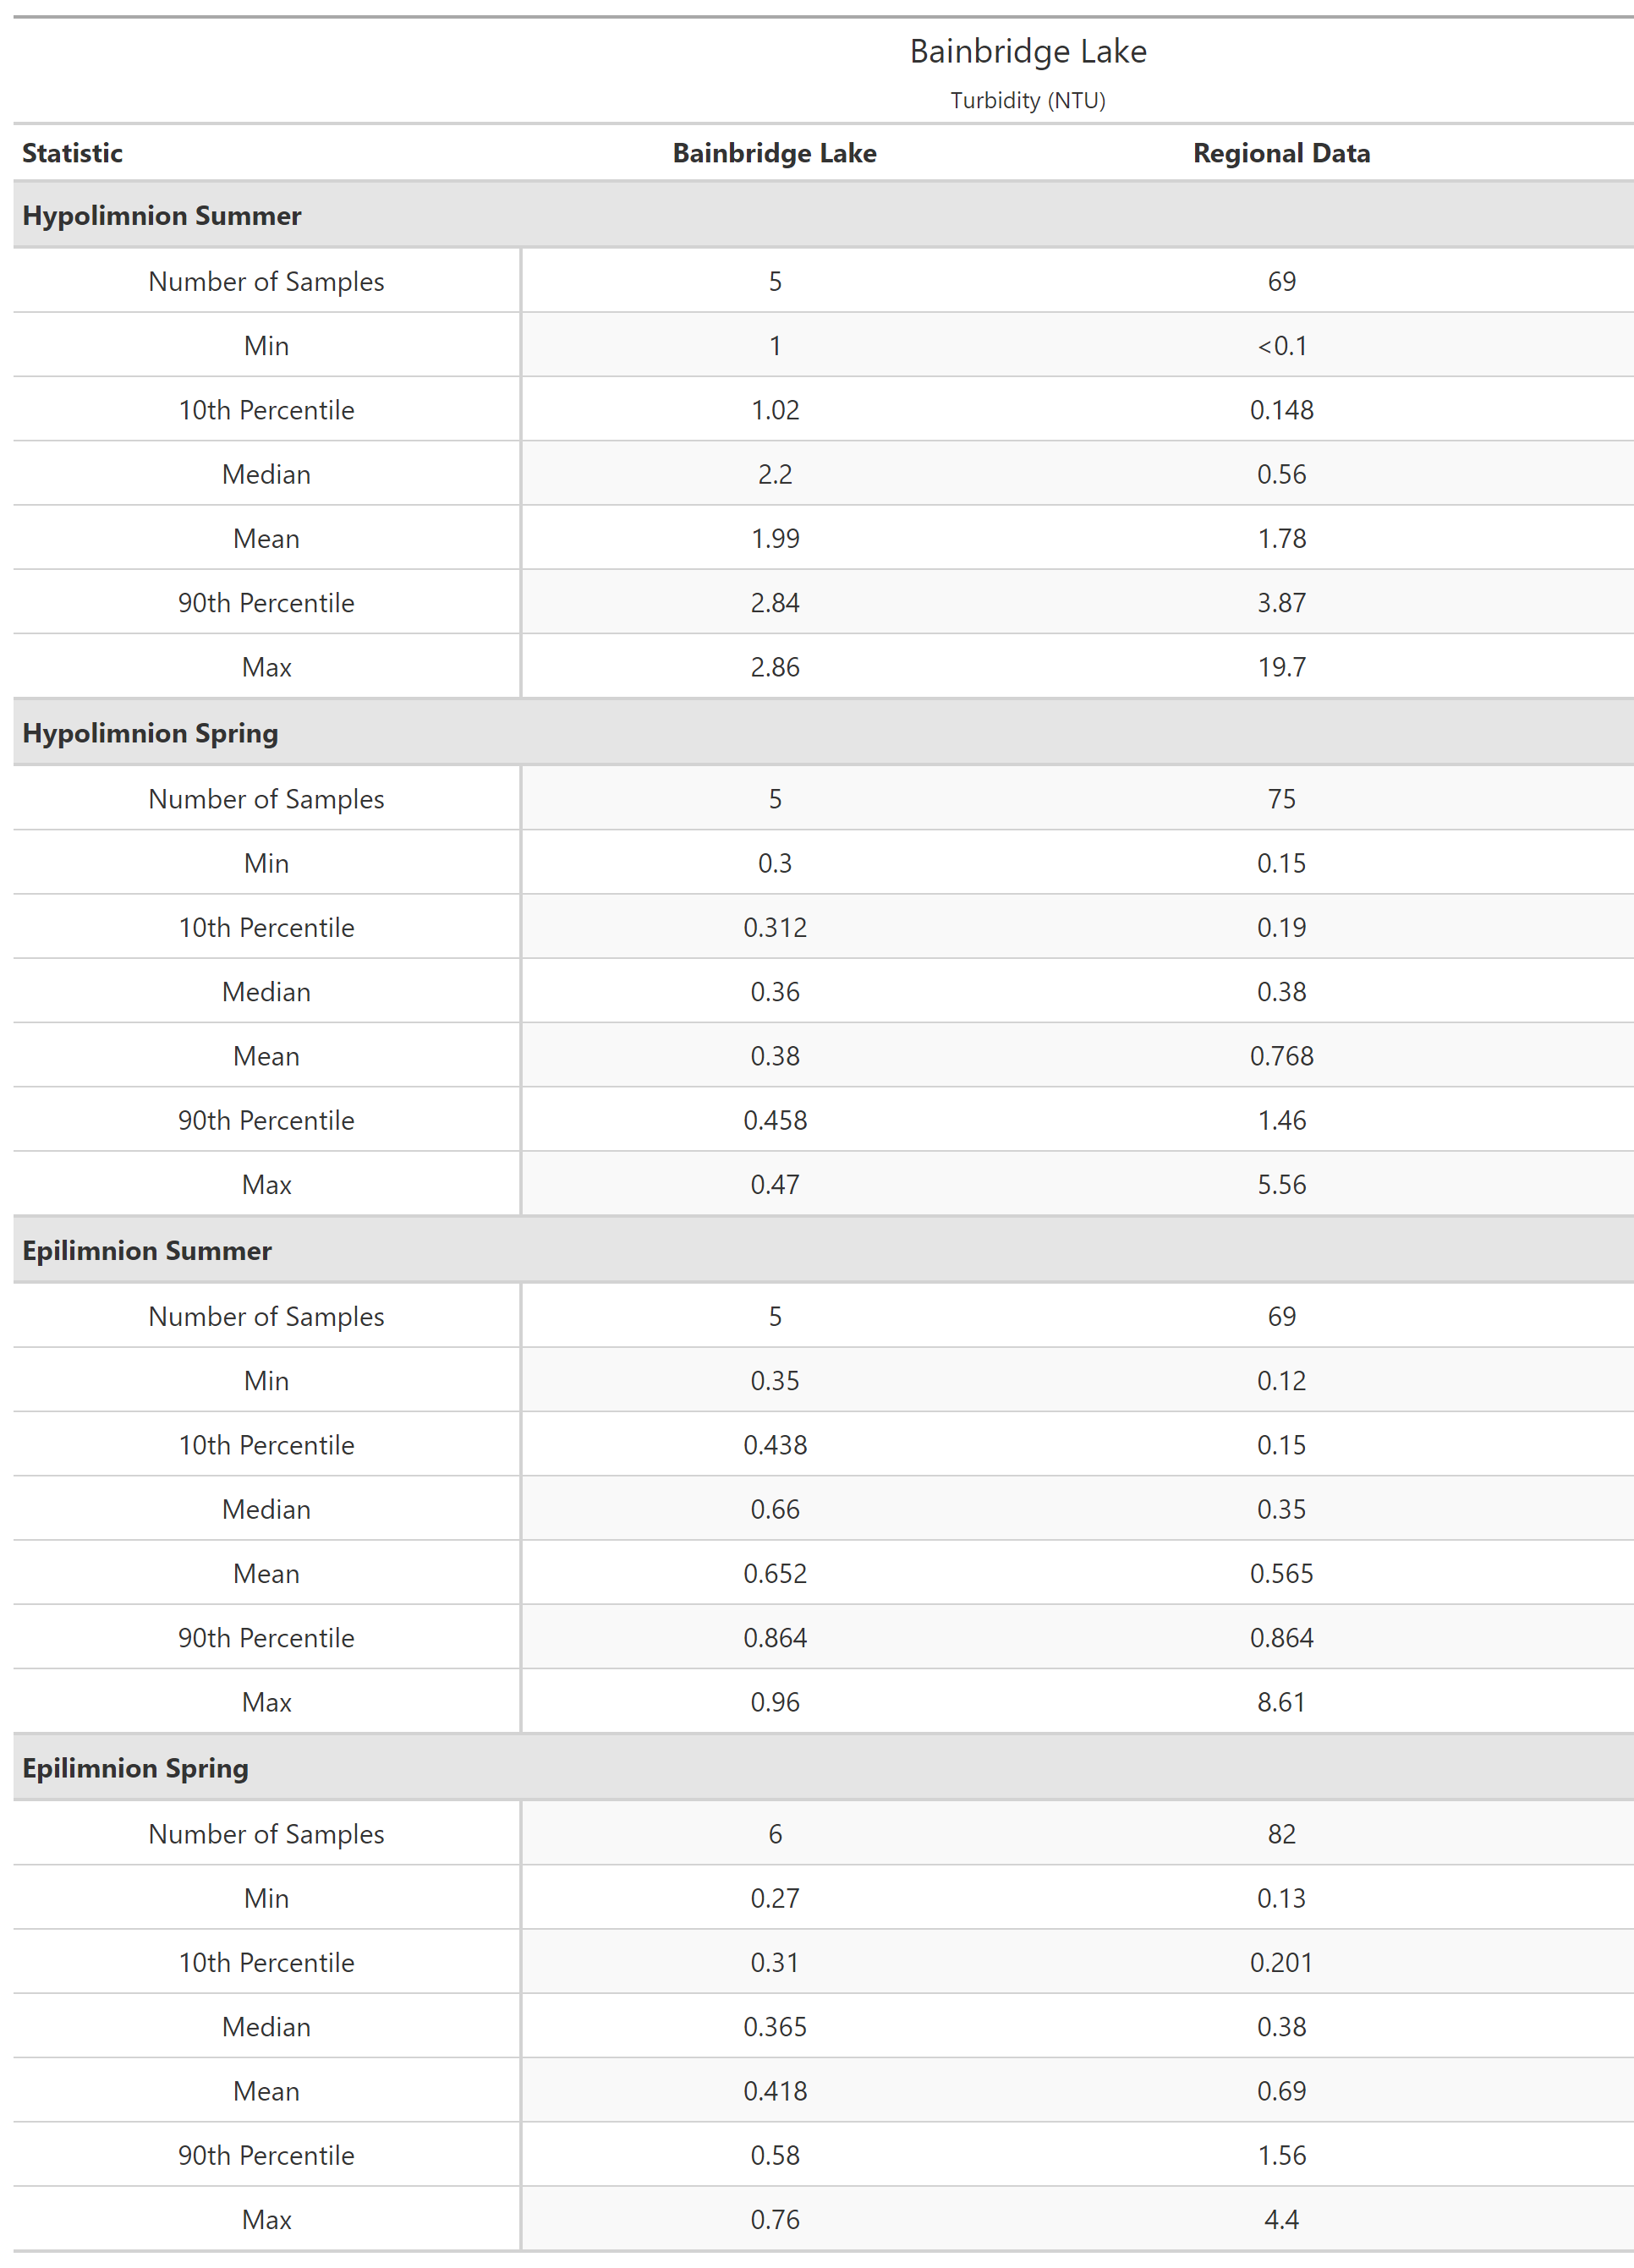 A table of summary statistics for Turbidity with comparison to regional data